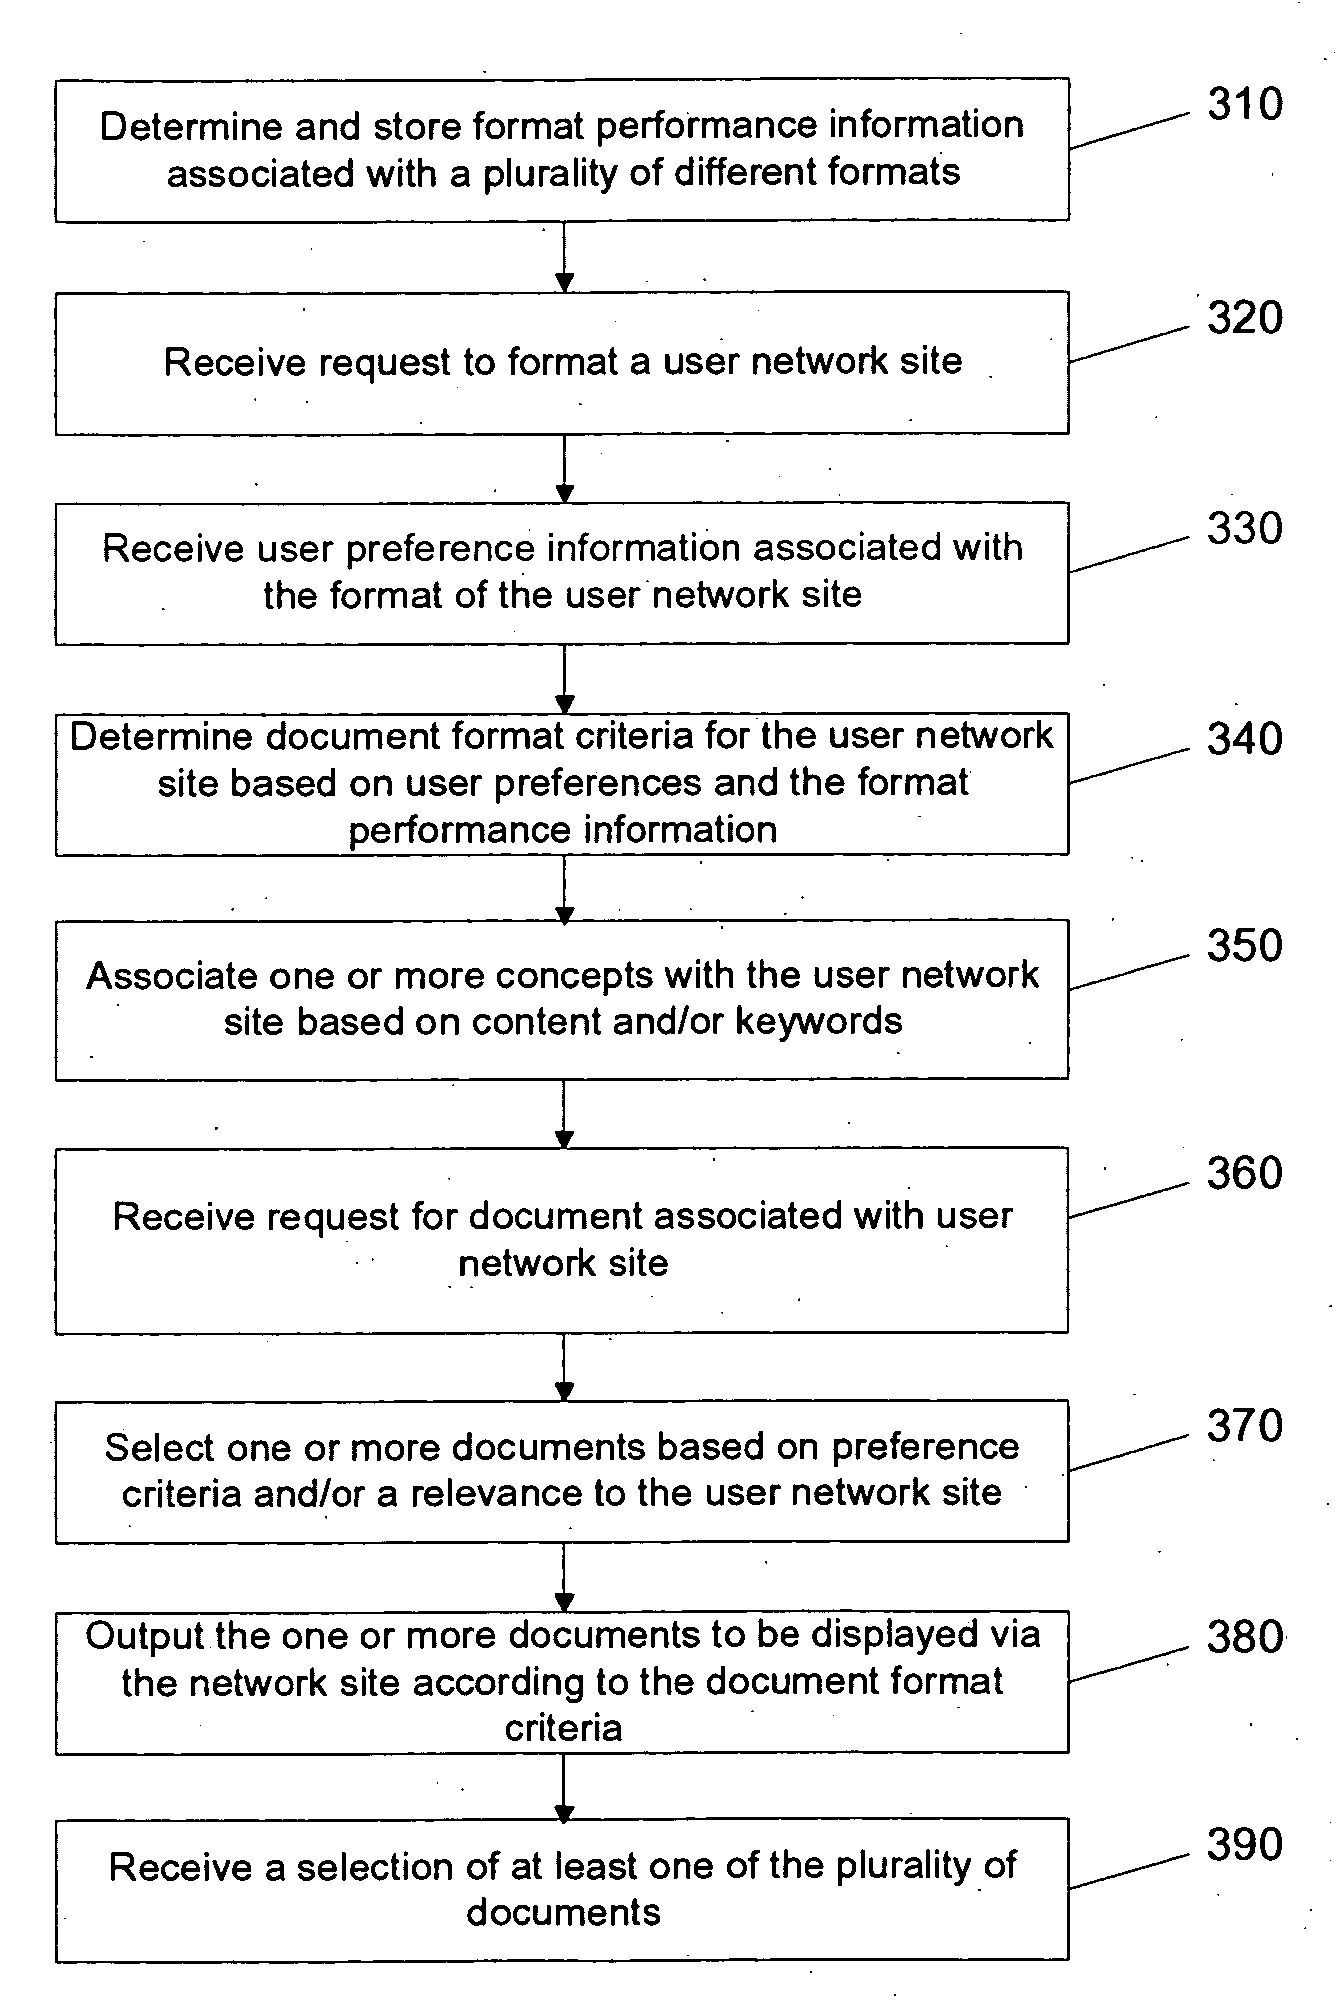 Formatting a user network site based on user preferences and format performance data